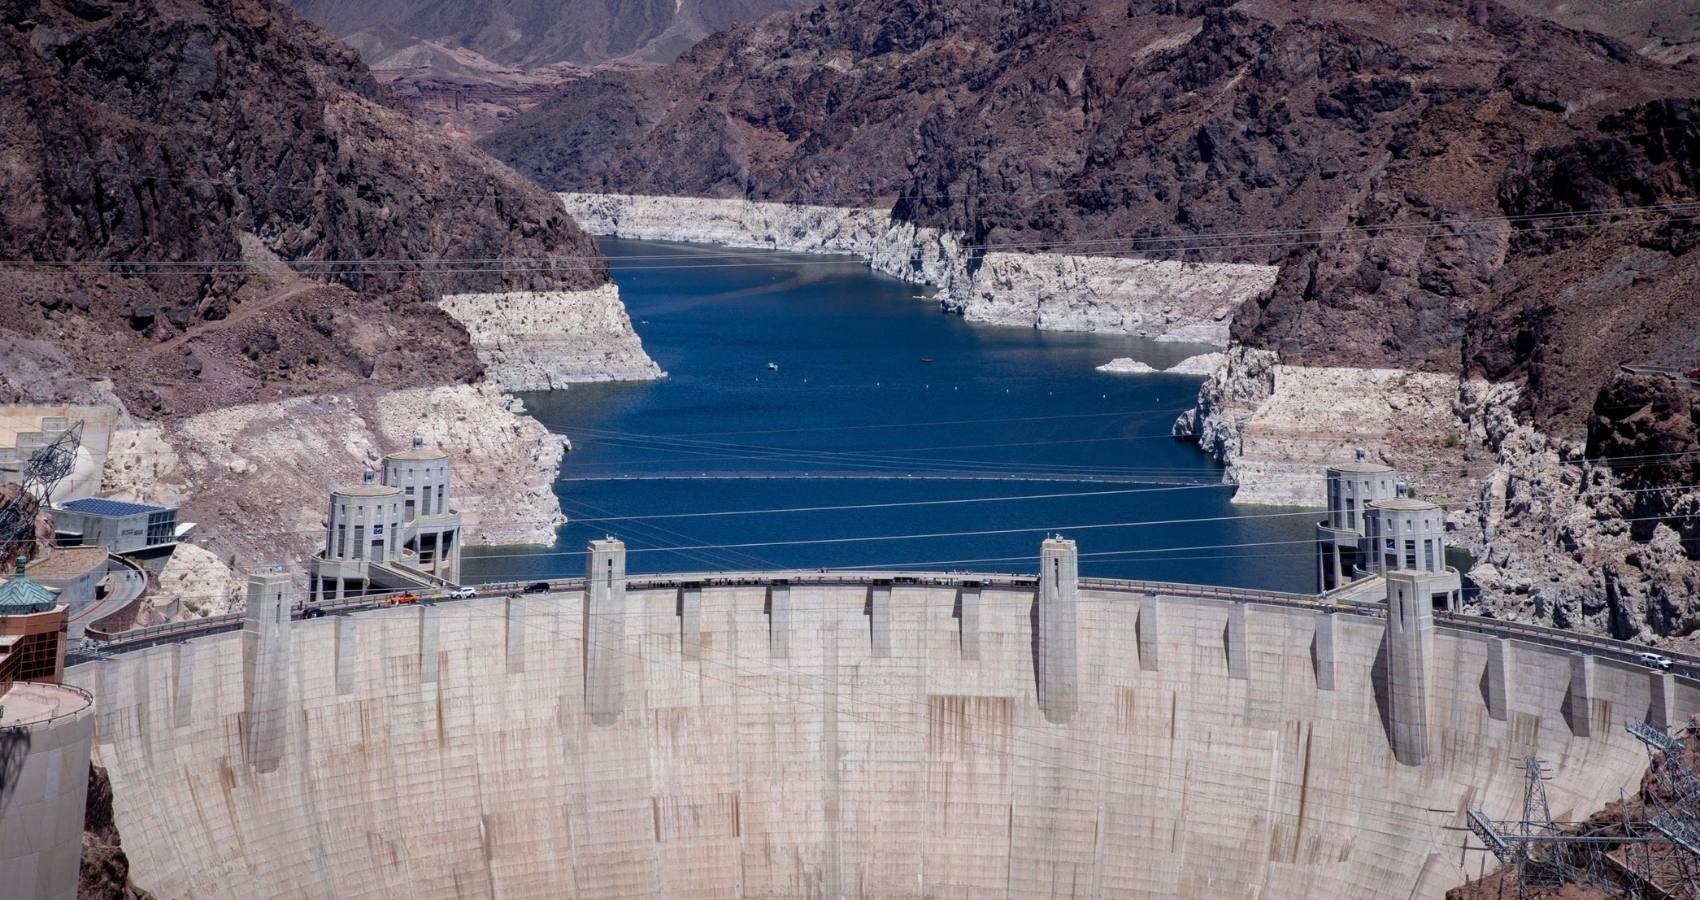 Hoover Dam And Lake Mead: Any Alert!!